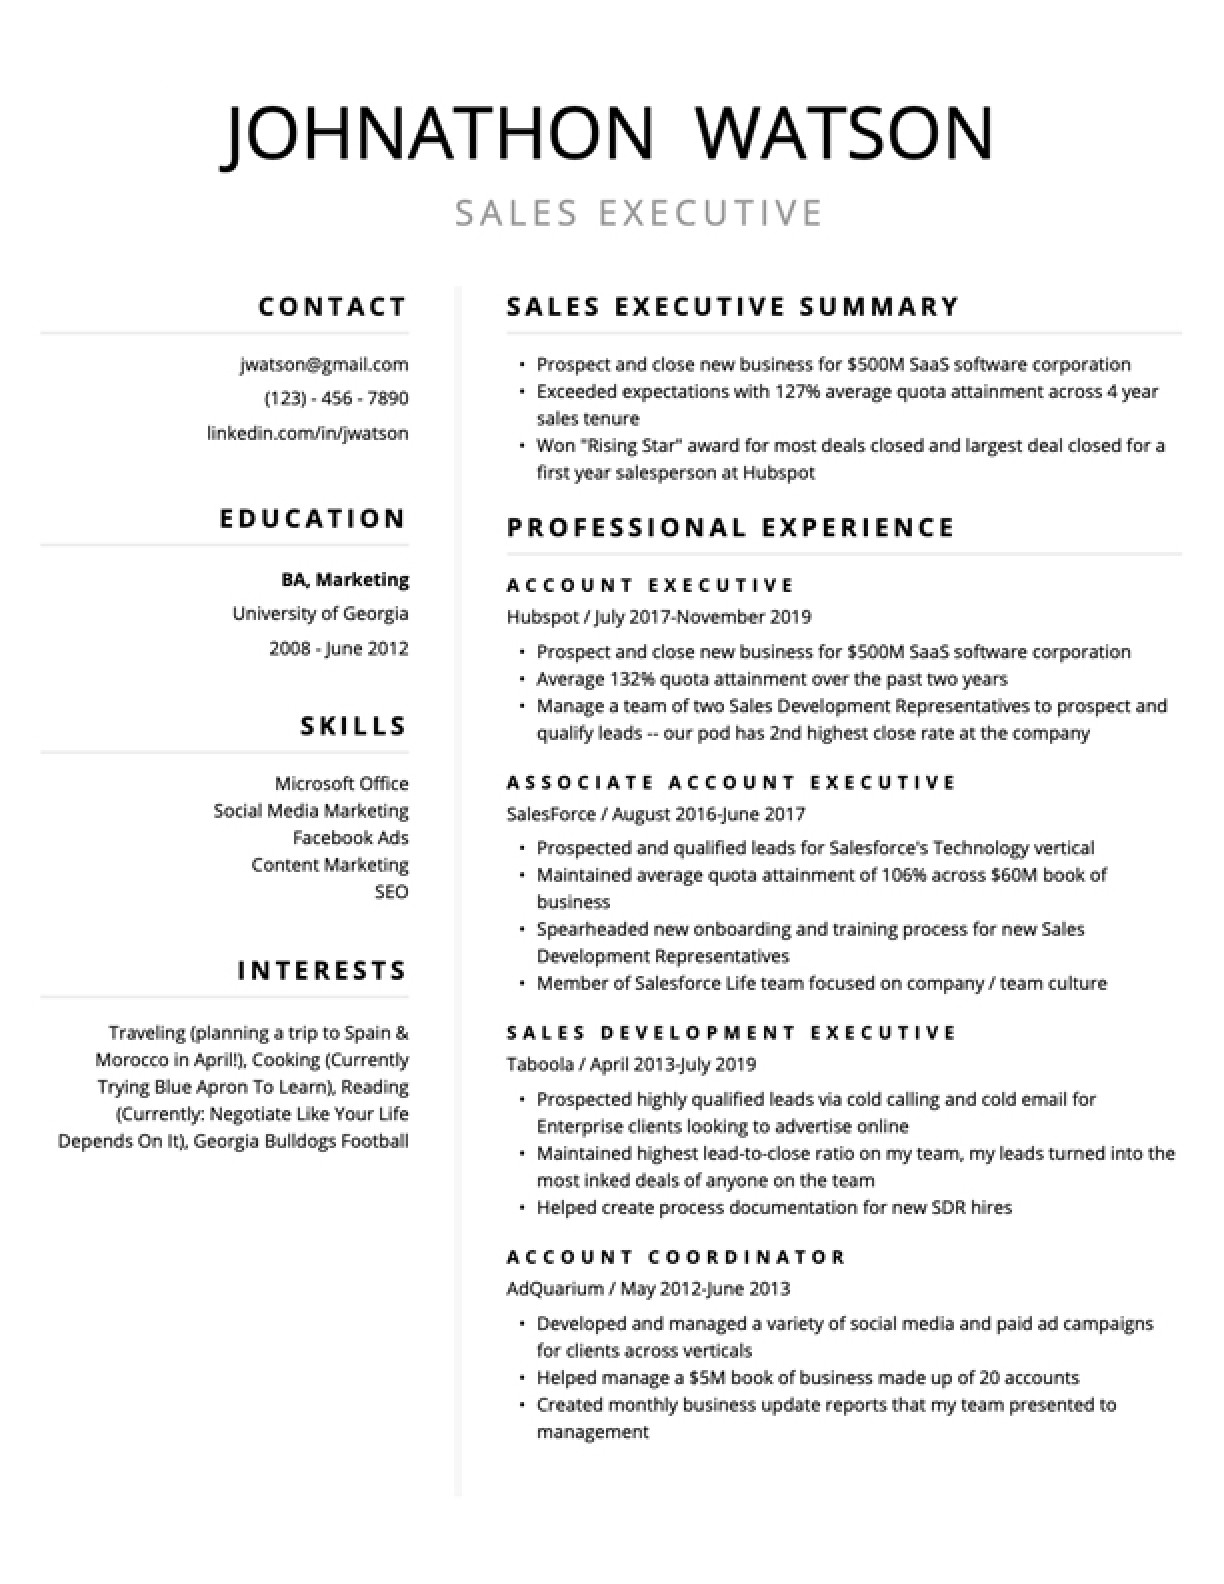 Sample Resume for New to Working Free Resume Templates for 2022 (edit & Download) Resybuild.io